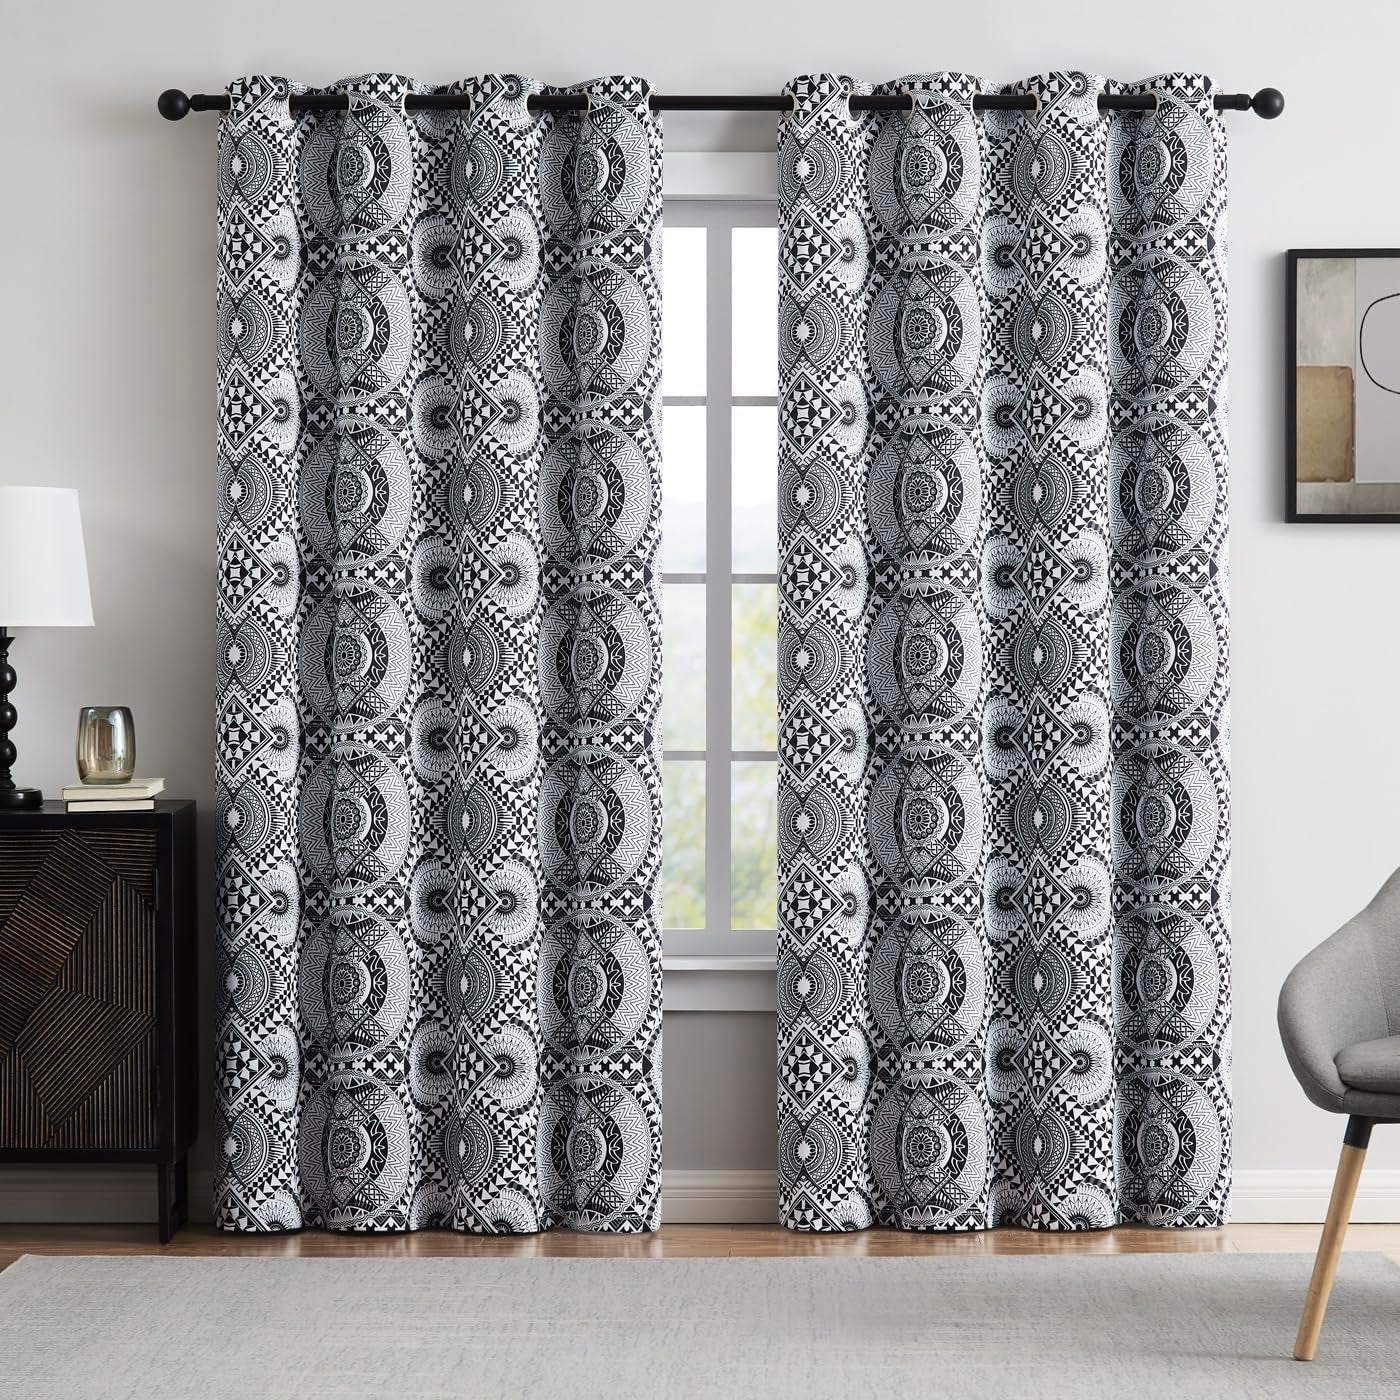 Metallic Geo Blackout Curtain Panels for Bedroom Thermal Insulated Light Blocking Foil Trellis Moroccan Window Treatments Diamond Grommet Drapes for Living-Room, Set of 2, 50" X 84", Beige/Gold  ugoutry Ethic Black 50"X84"X2 